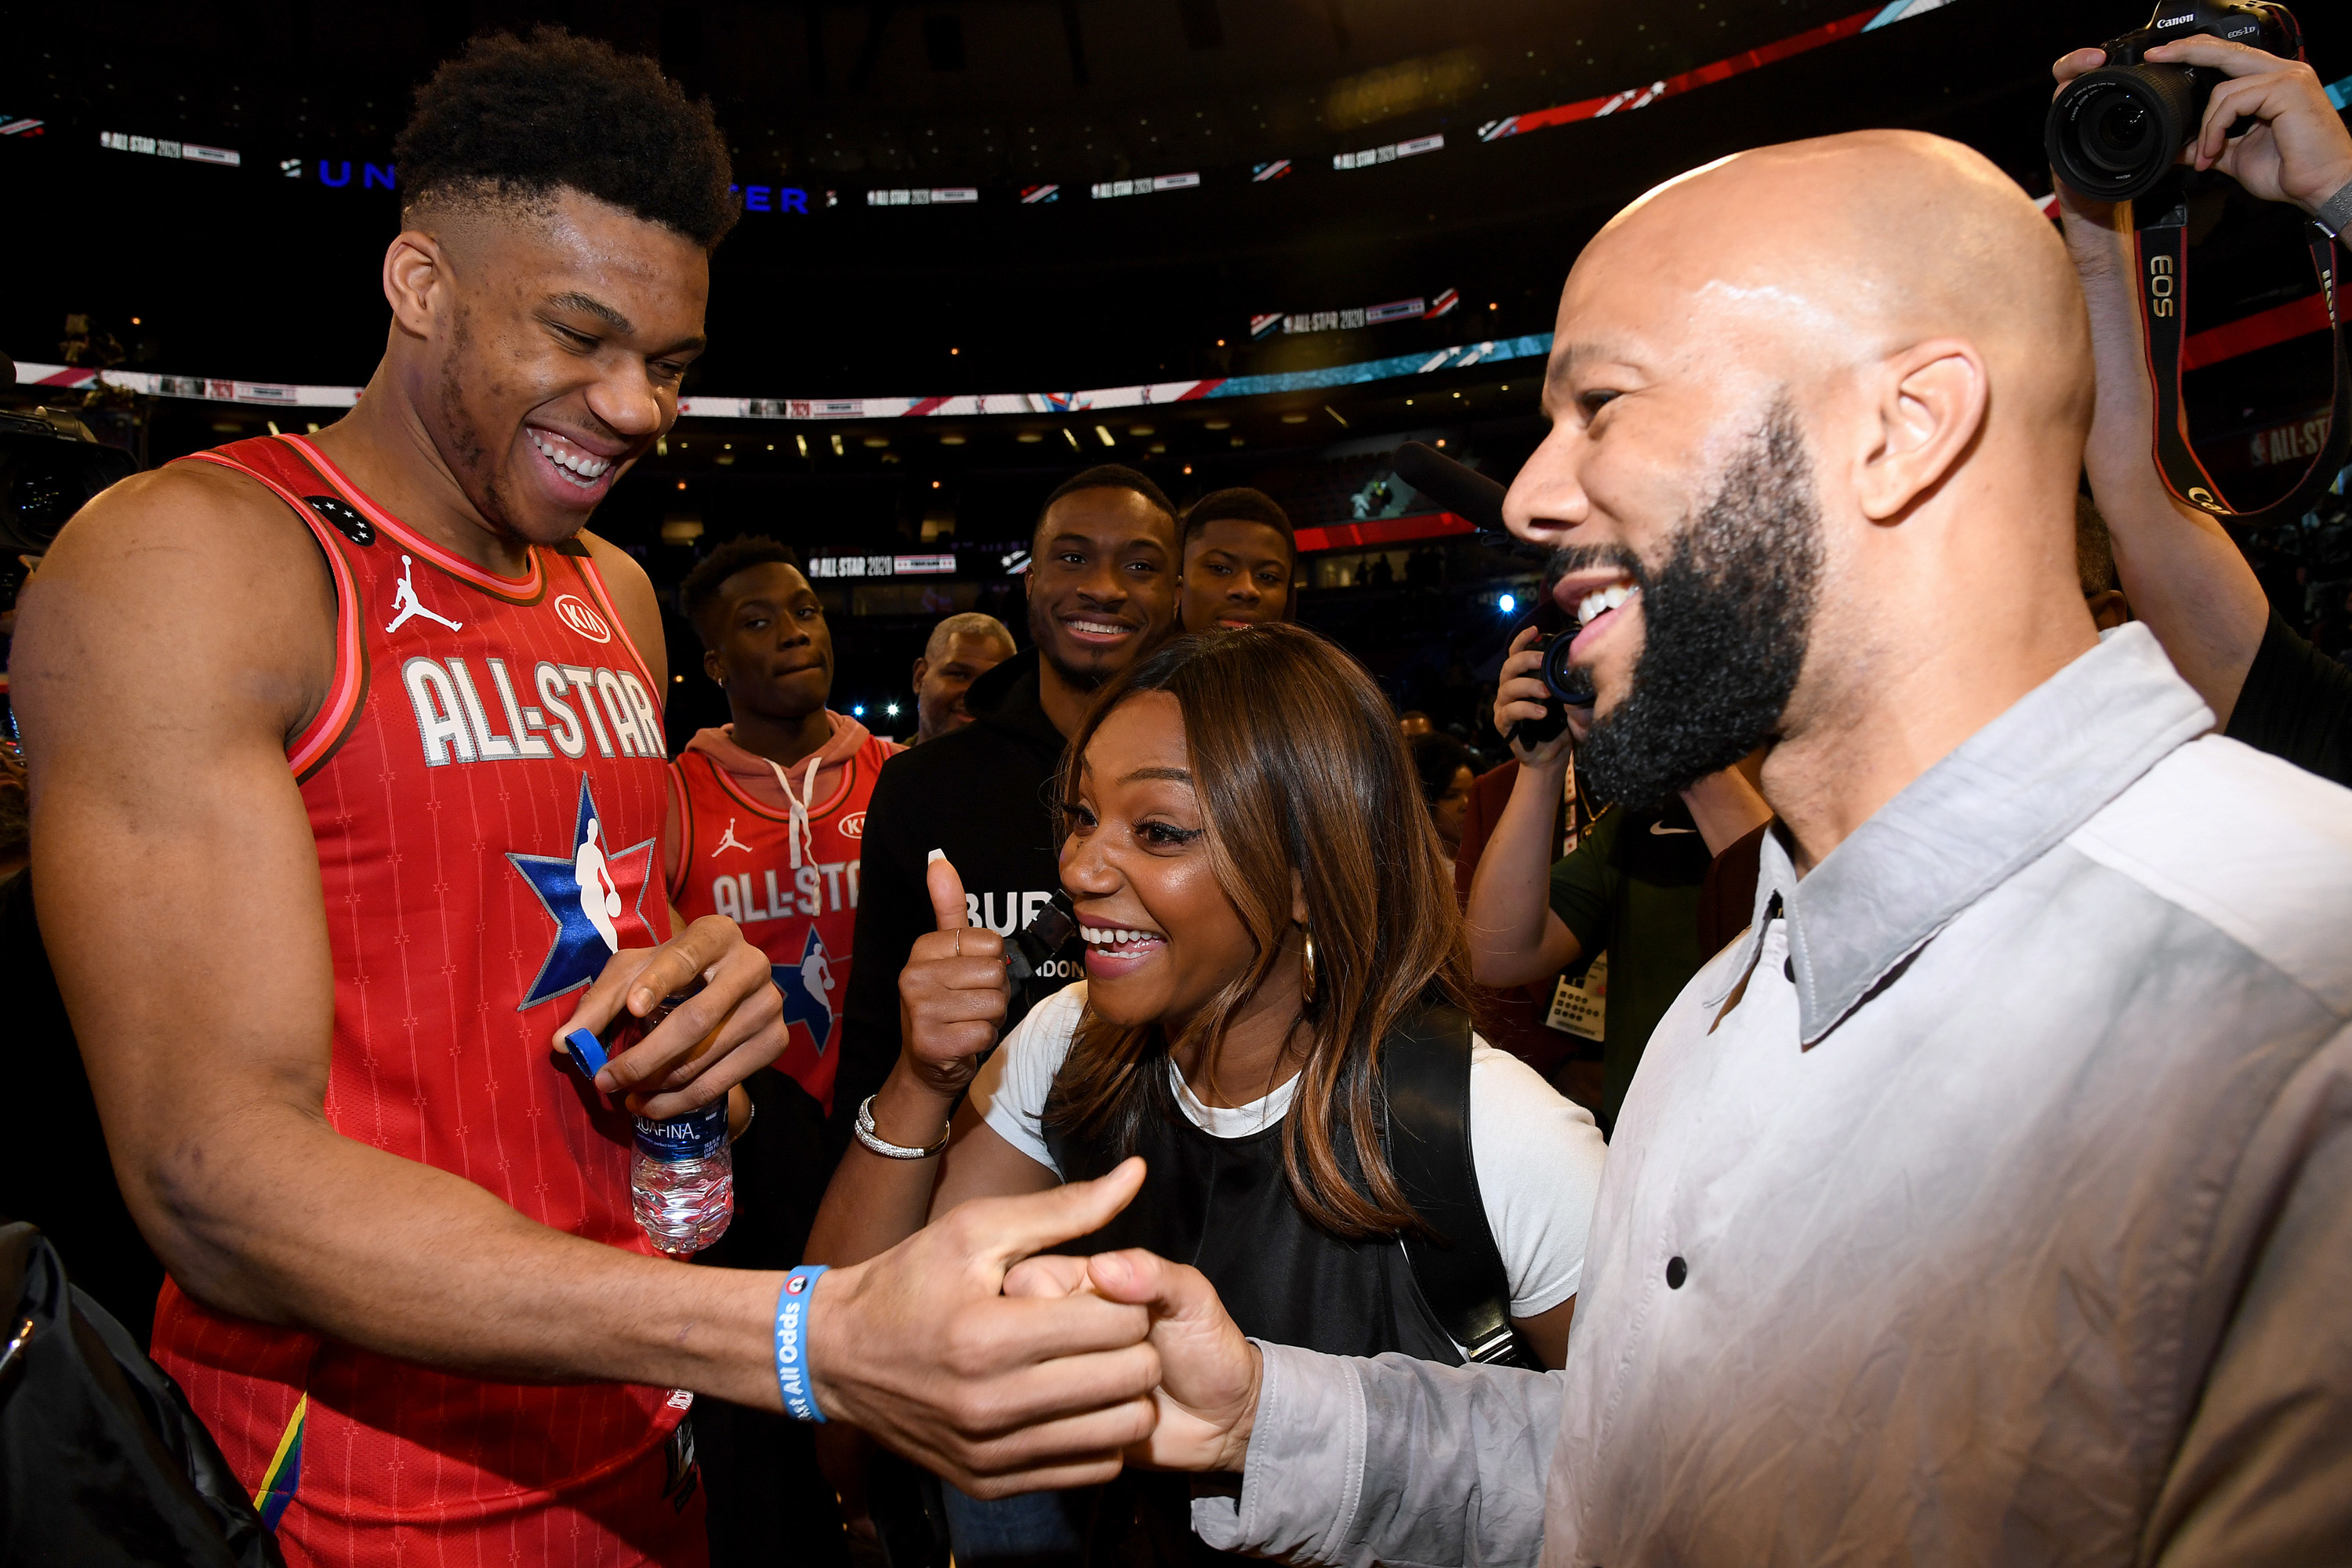 Tiffany gives a thumbs up while Common and Giannis Antetokounmpo clasp hands at a basketball game